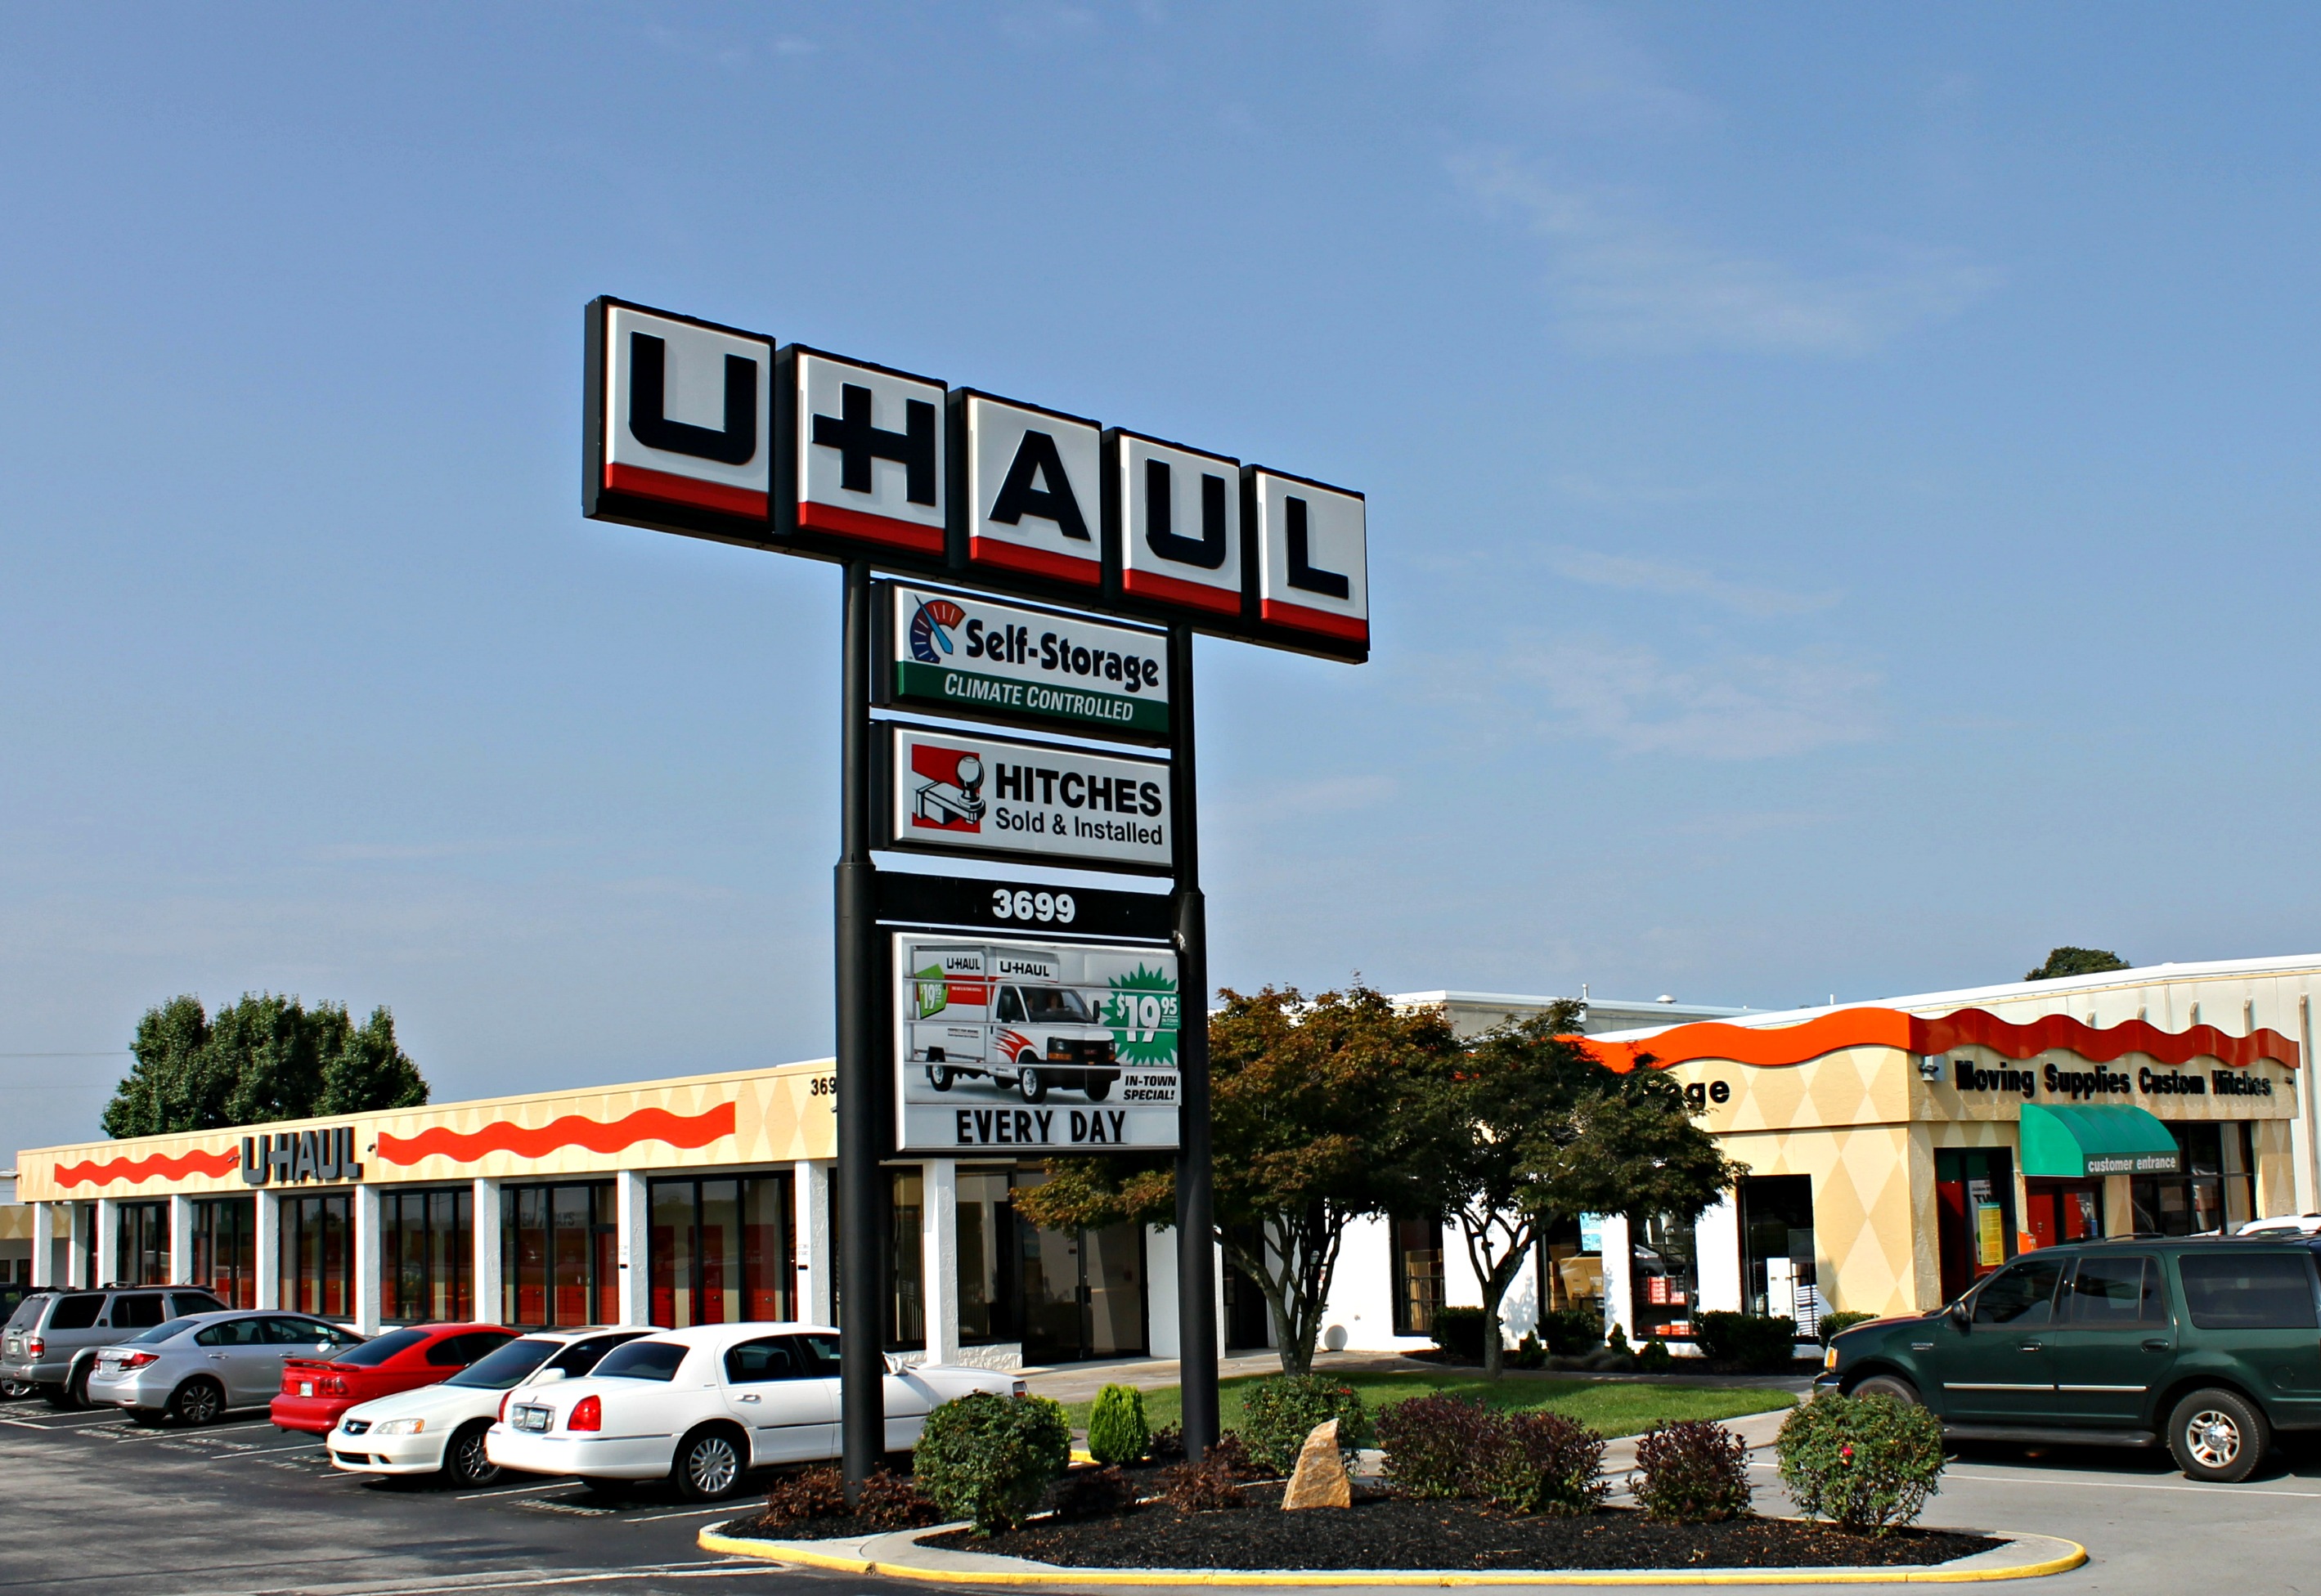 U-Haul Offers 30 Days Free Self-Storage to Sevier County Residents Affected by Fires